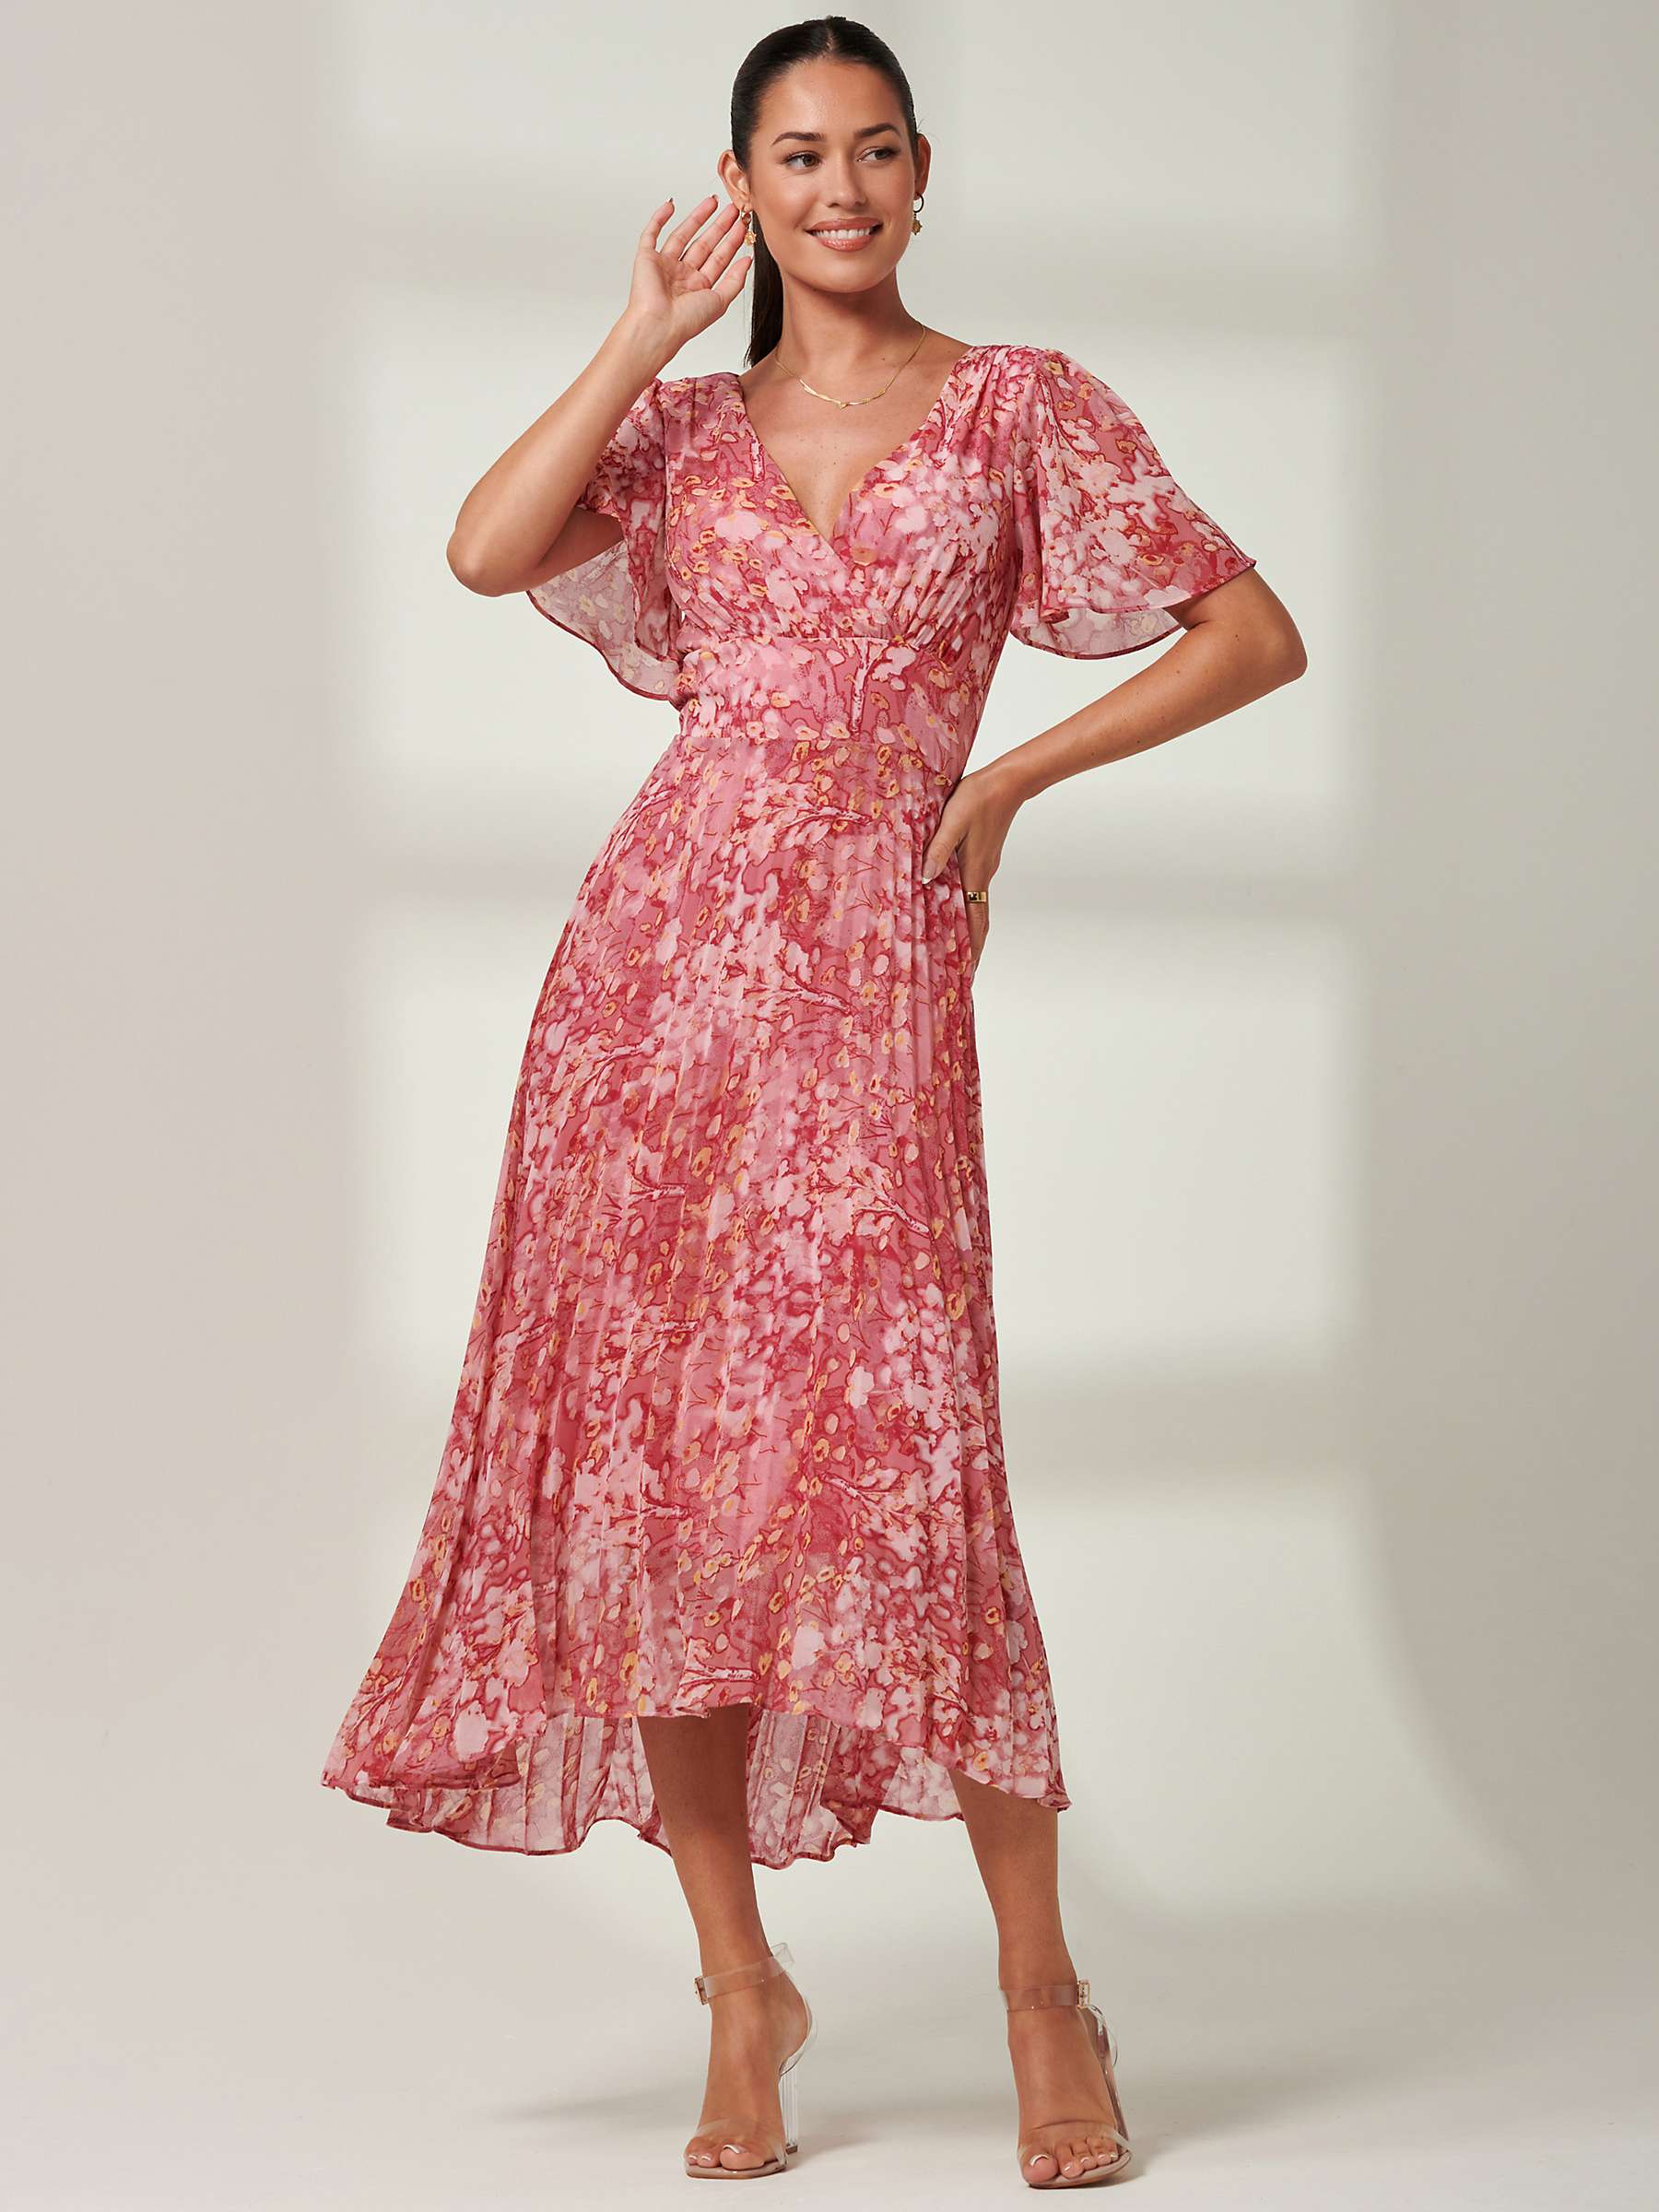 Buy Jolie Moi Olenna Abstract Print Chiffon Maxi Dress, Red/Multi Online at johnlewis.com